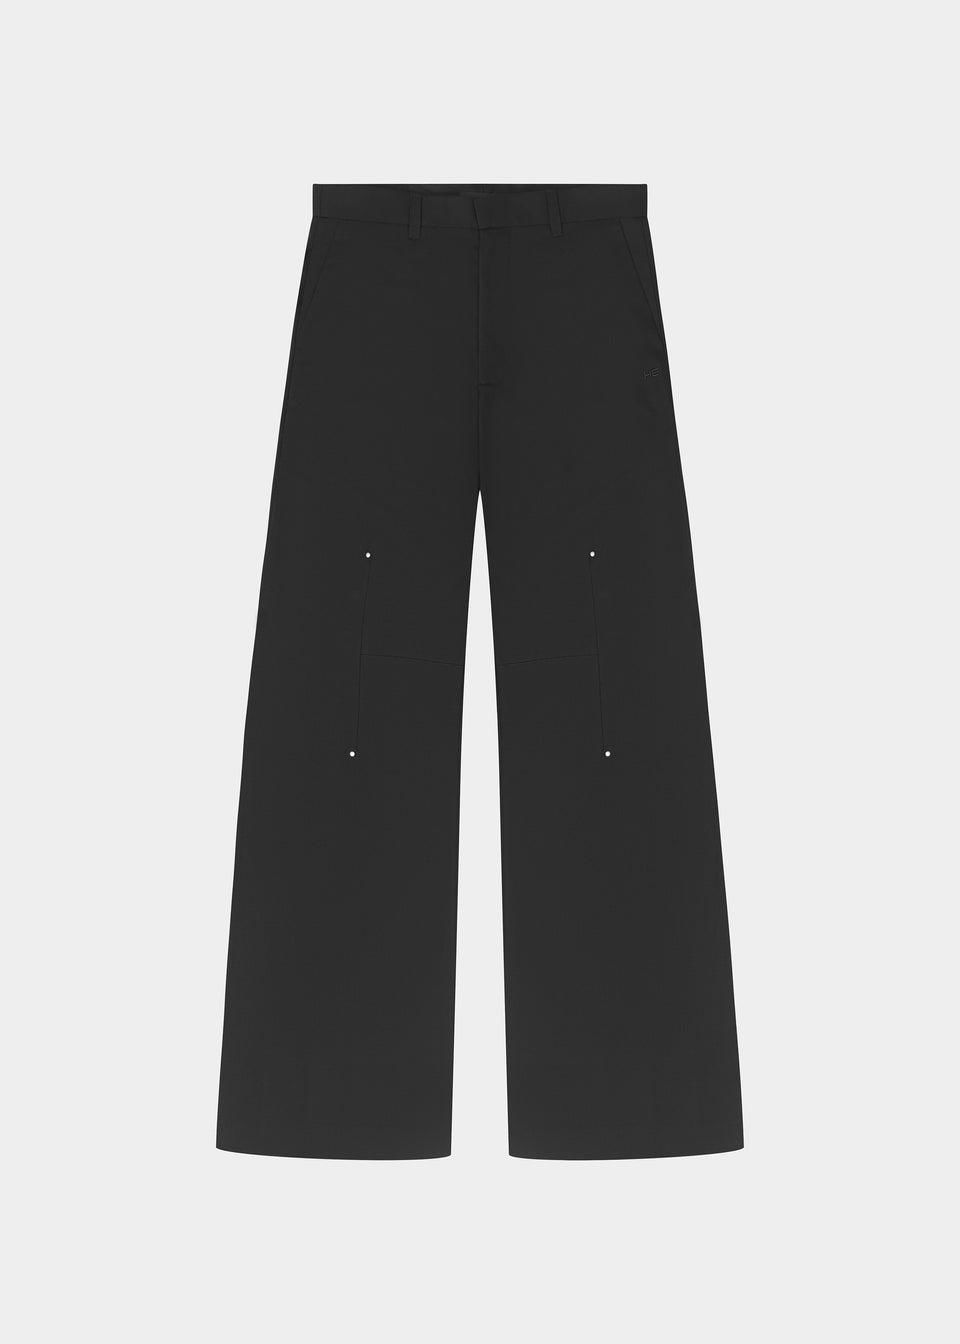 RADIAL TAILORED TROUSERS by HELIOT EMIL